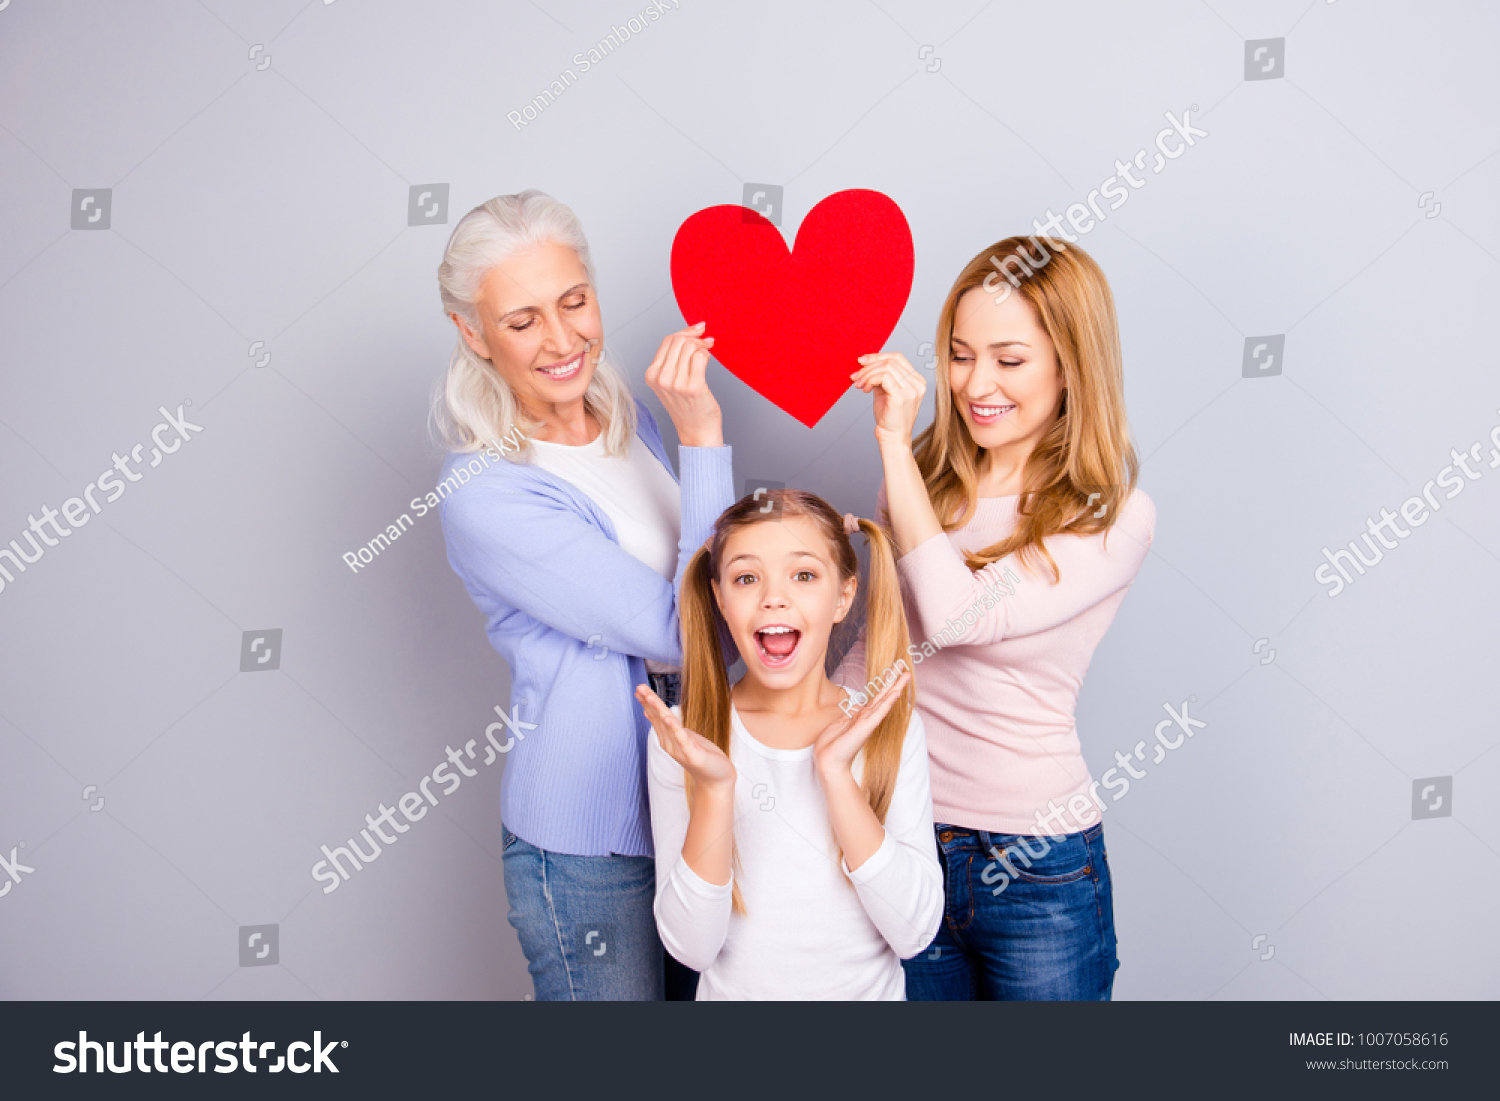 Emotional feeling tenderness gentle warmth concept, Beautiful mum and delightful granny are holding big bright red heart over joy joyful cheerful small girl's head isolated on gray background #1007058616